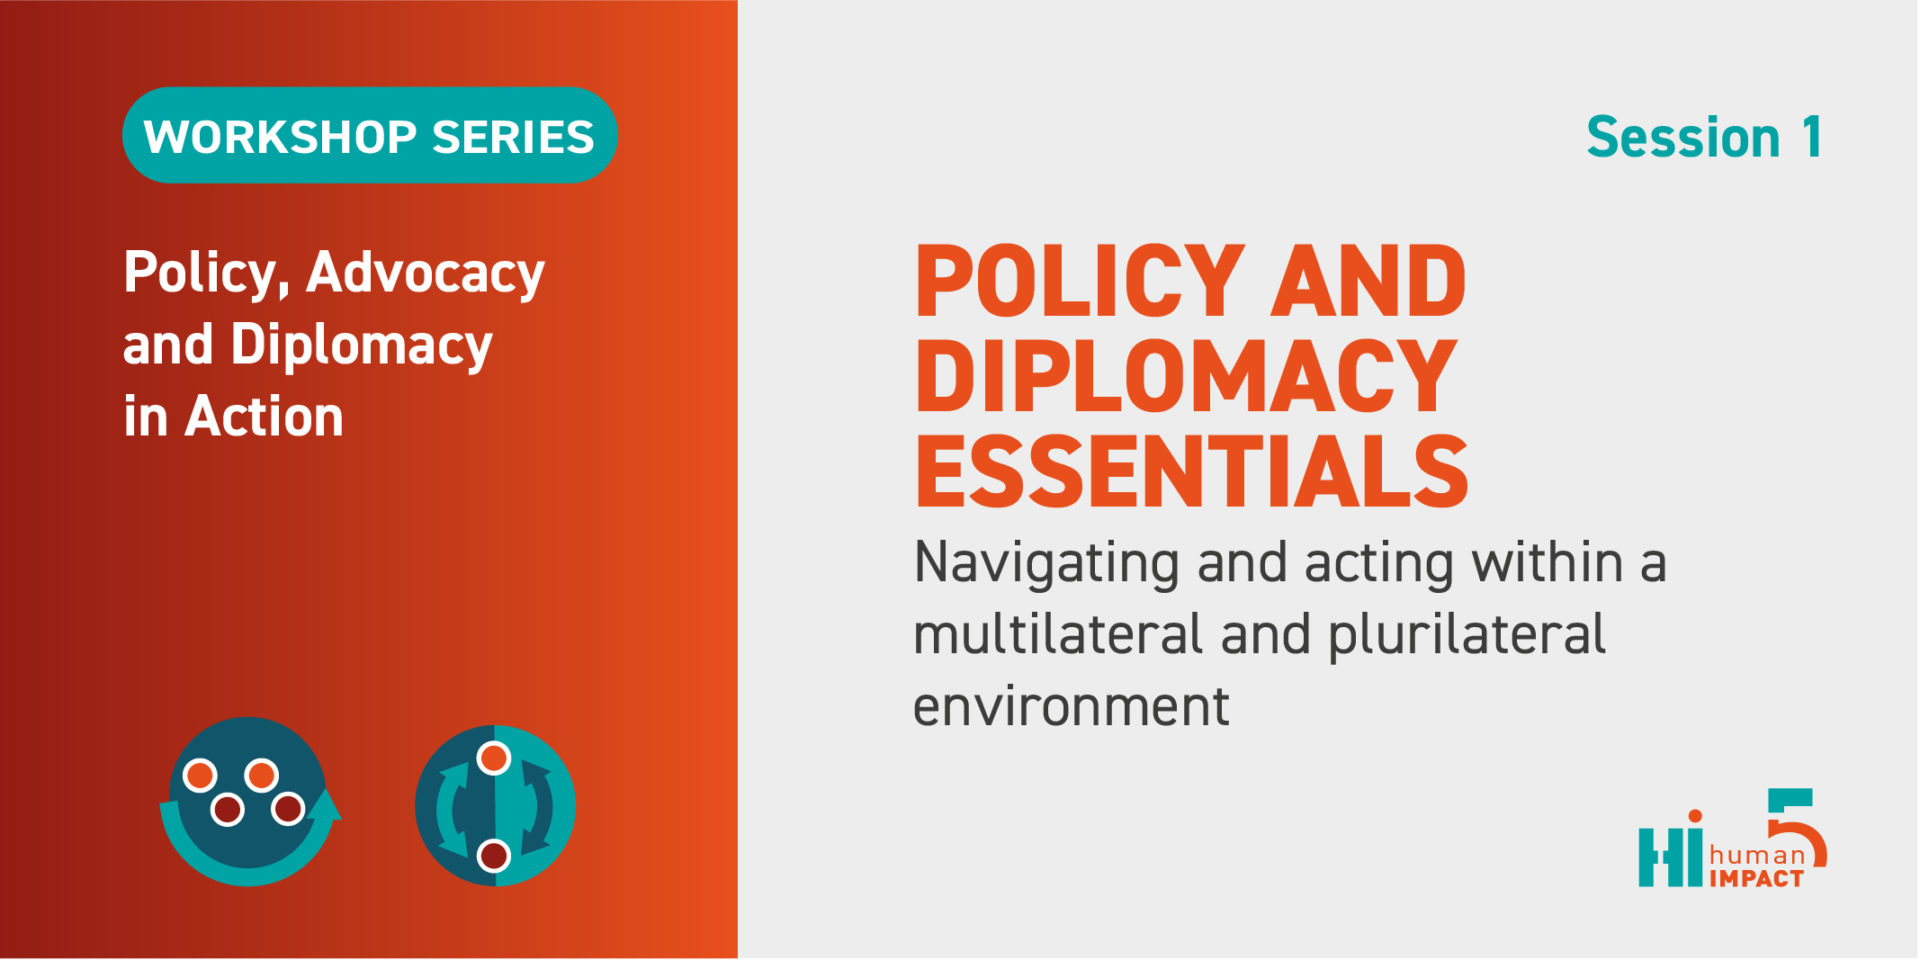 Policicy and Diplomacy Essentials illustration